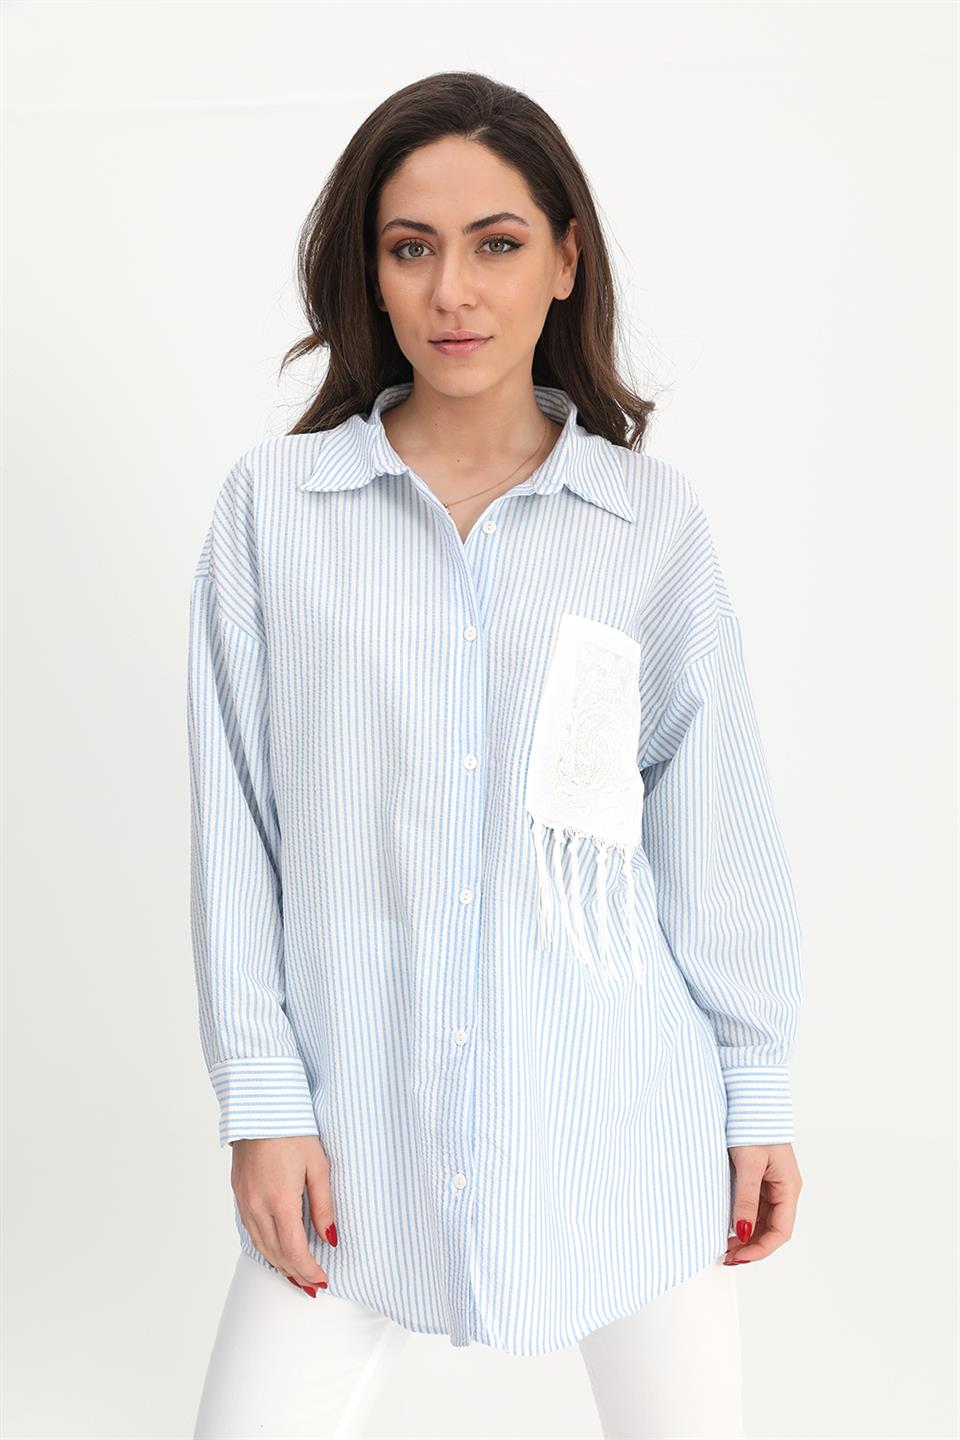 Women's Shirt Pocket Embroidery Tasseled See-through - Blue - STREETMODE™